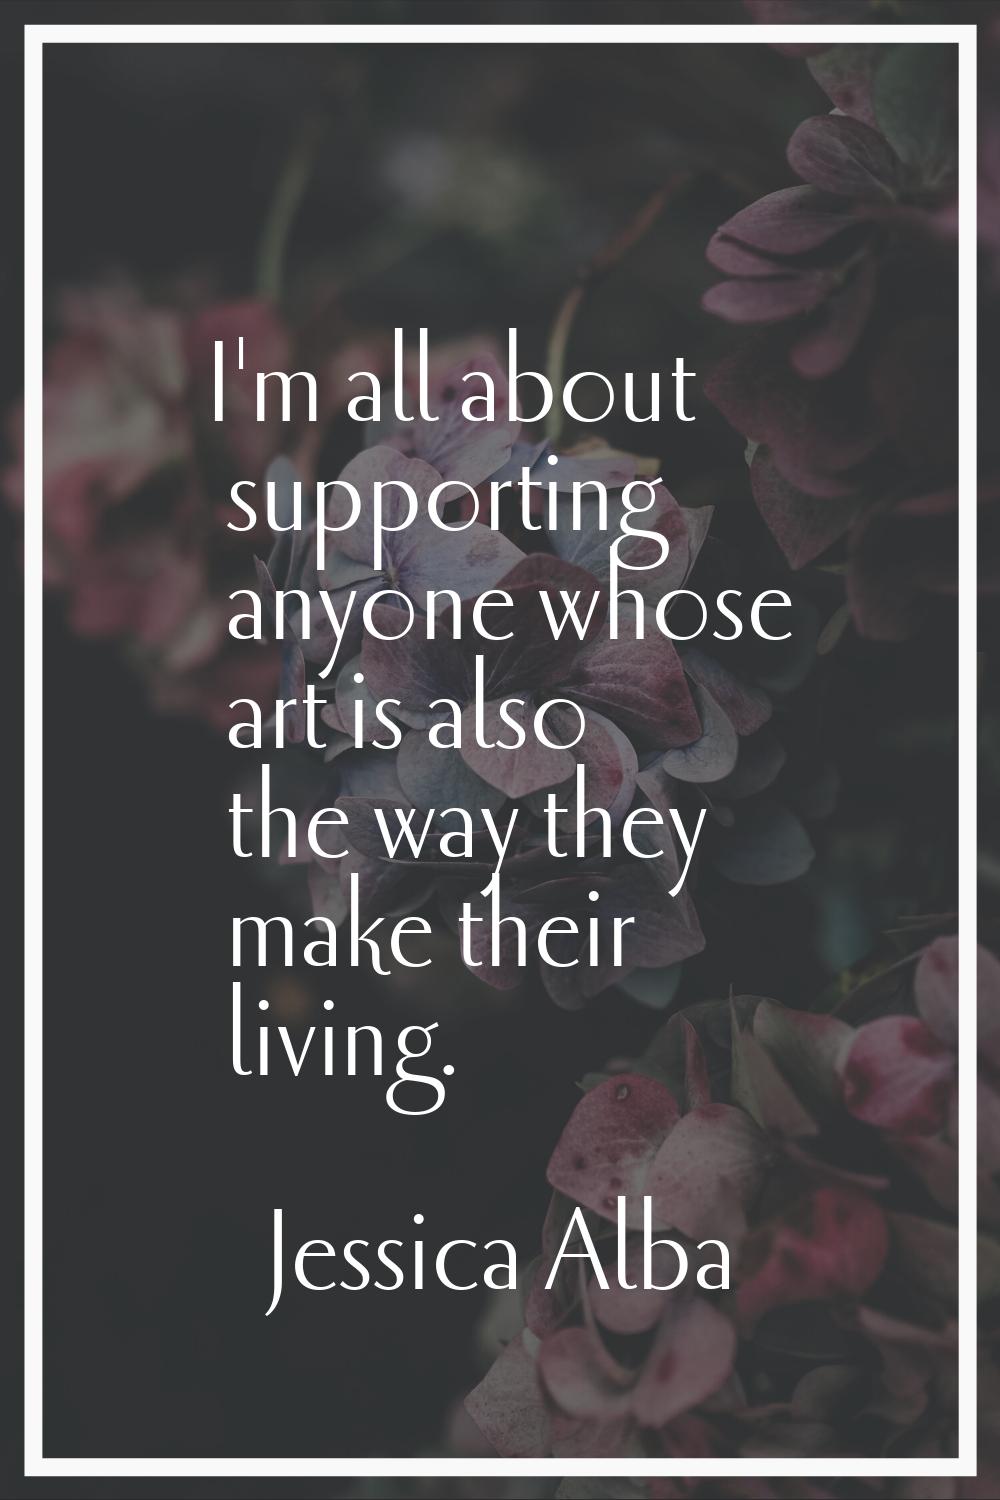 I'm all about supporting anyone whose art is also the way they make their living.